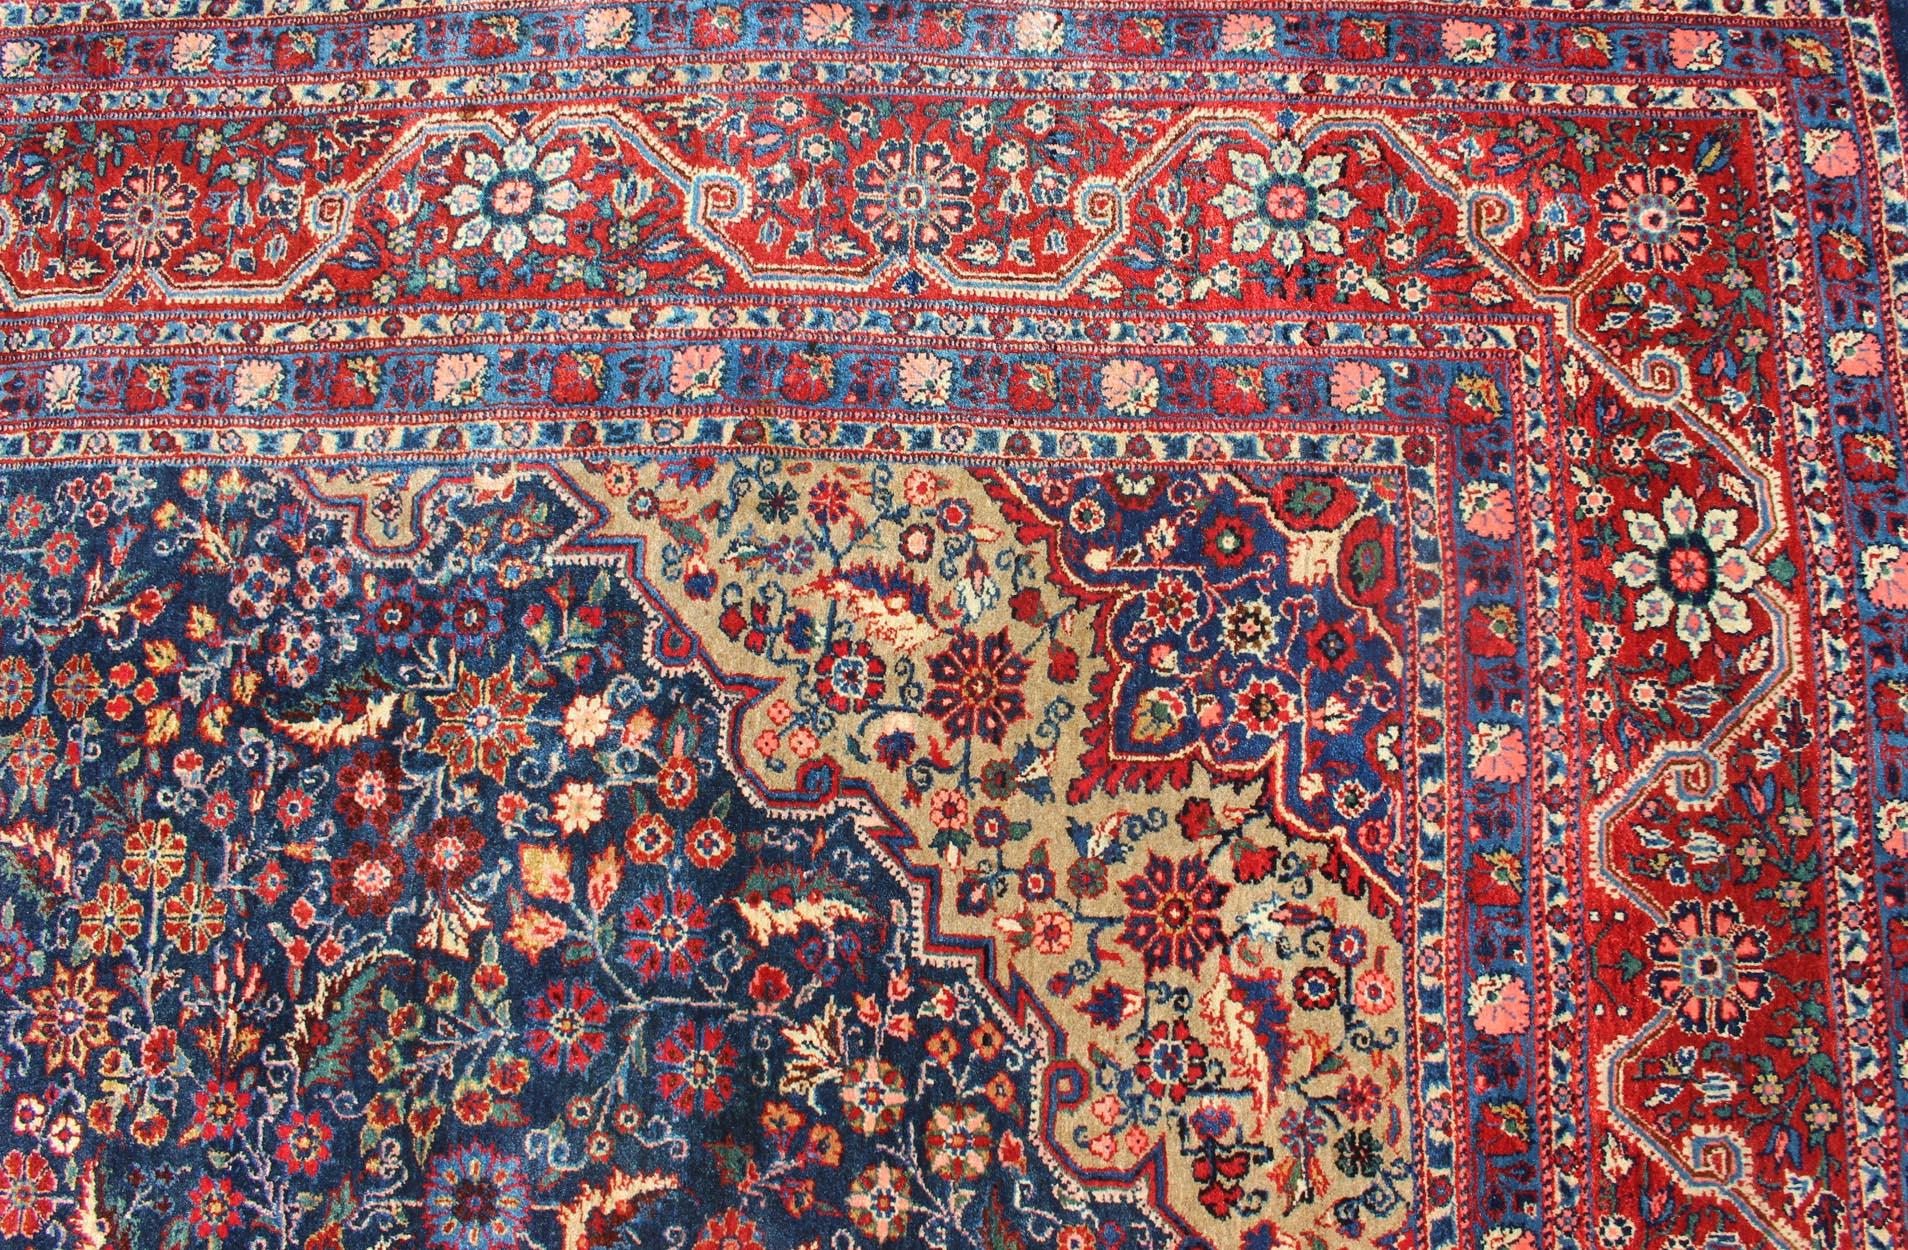 Antique Tribal Medallion Josan Rug with Jewel Tones with Center Medallion For Sale 2